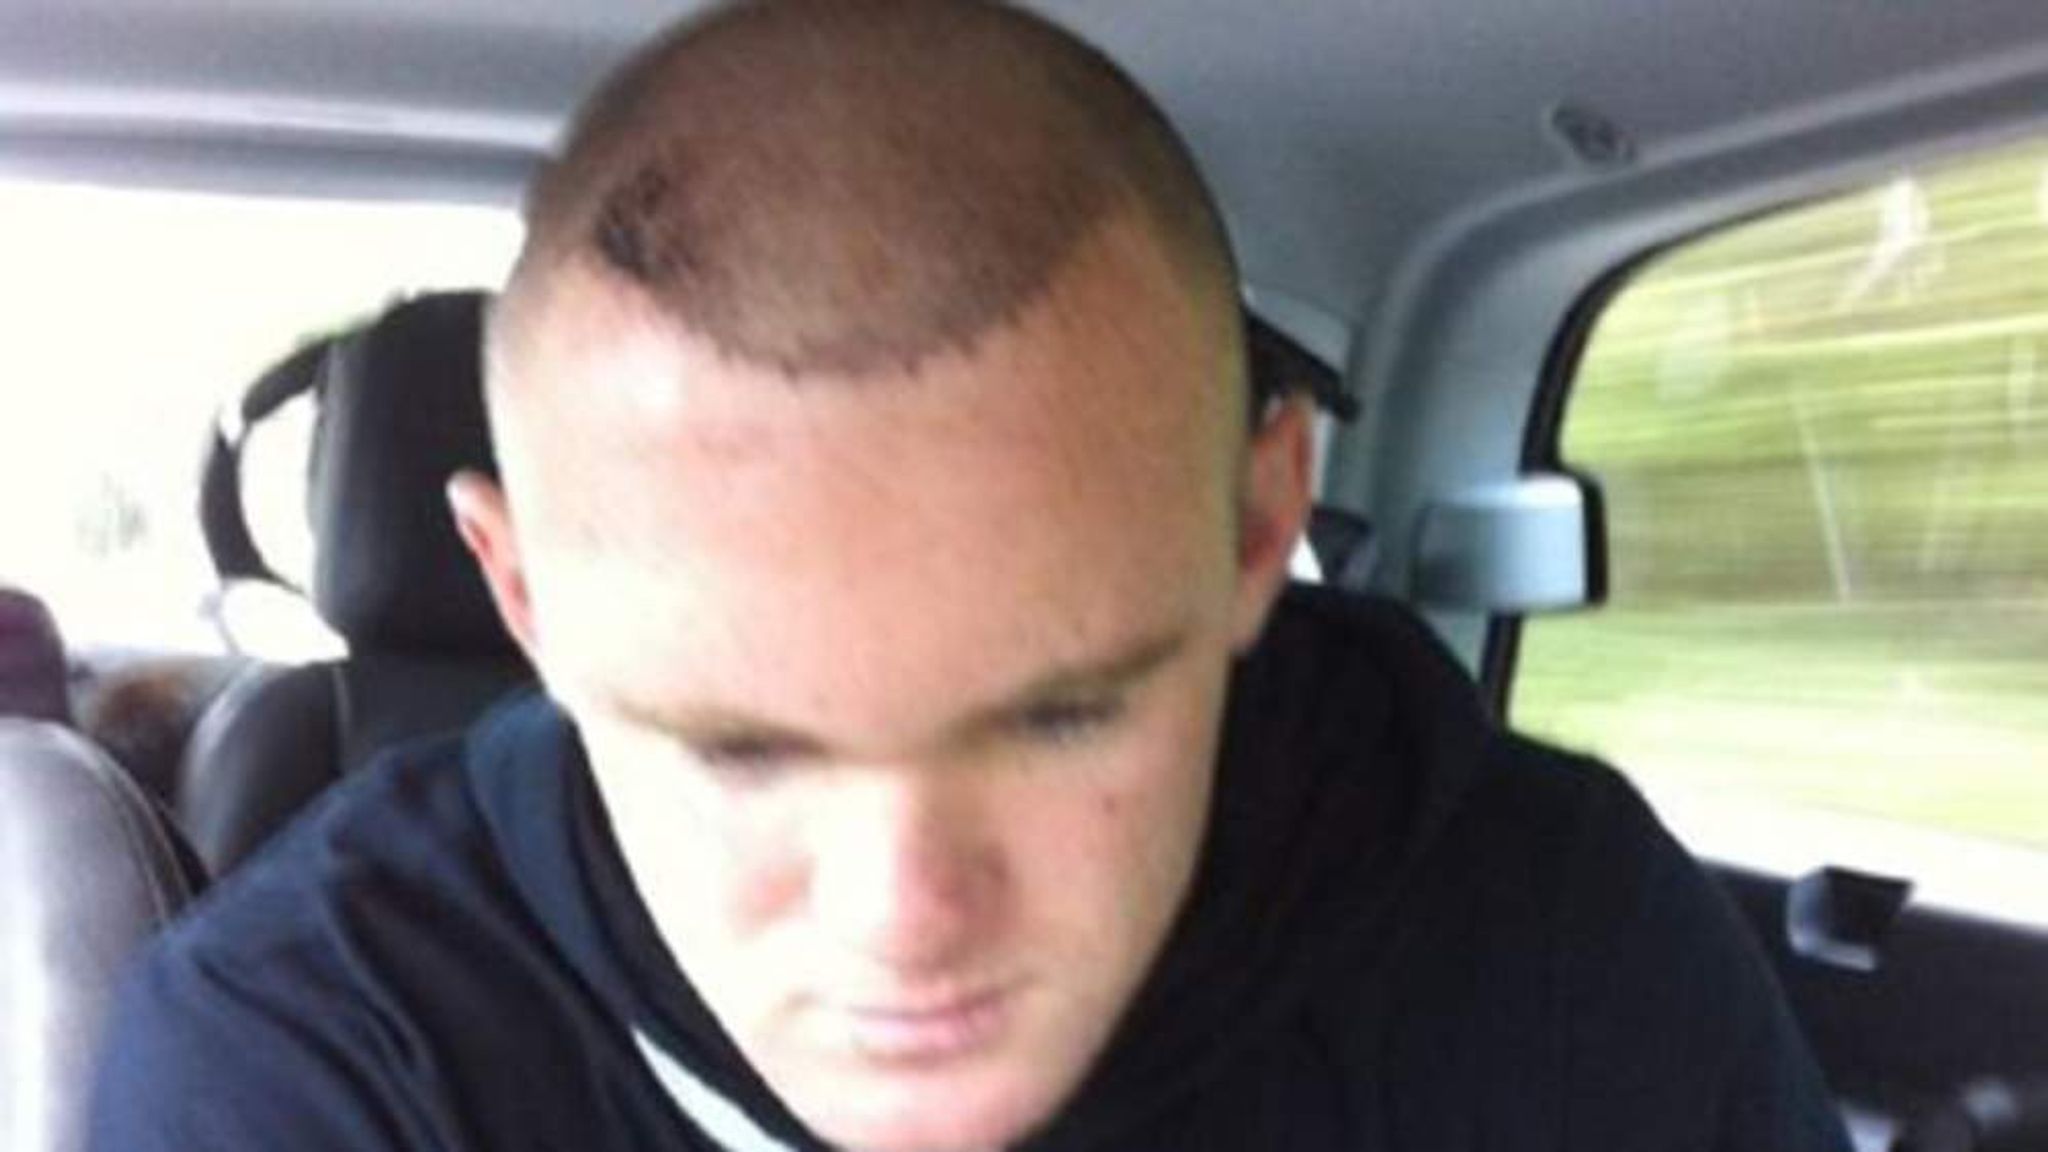 Rooney Shows Off His New Barnet After Hair Transplant | Scoop News | Sky  News